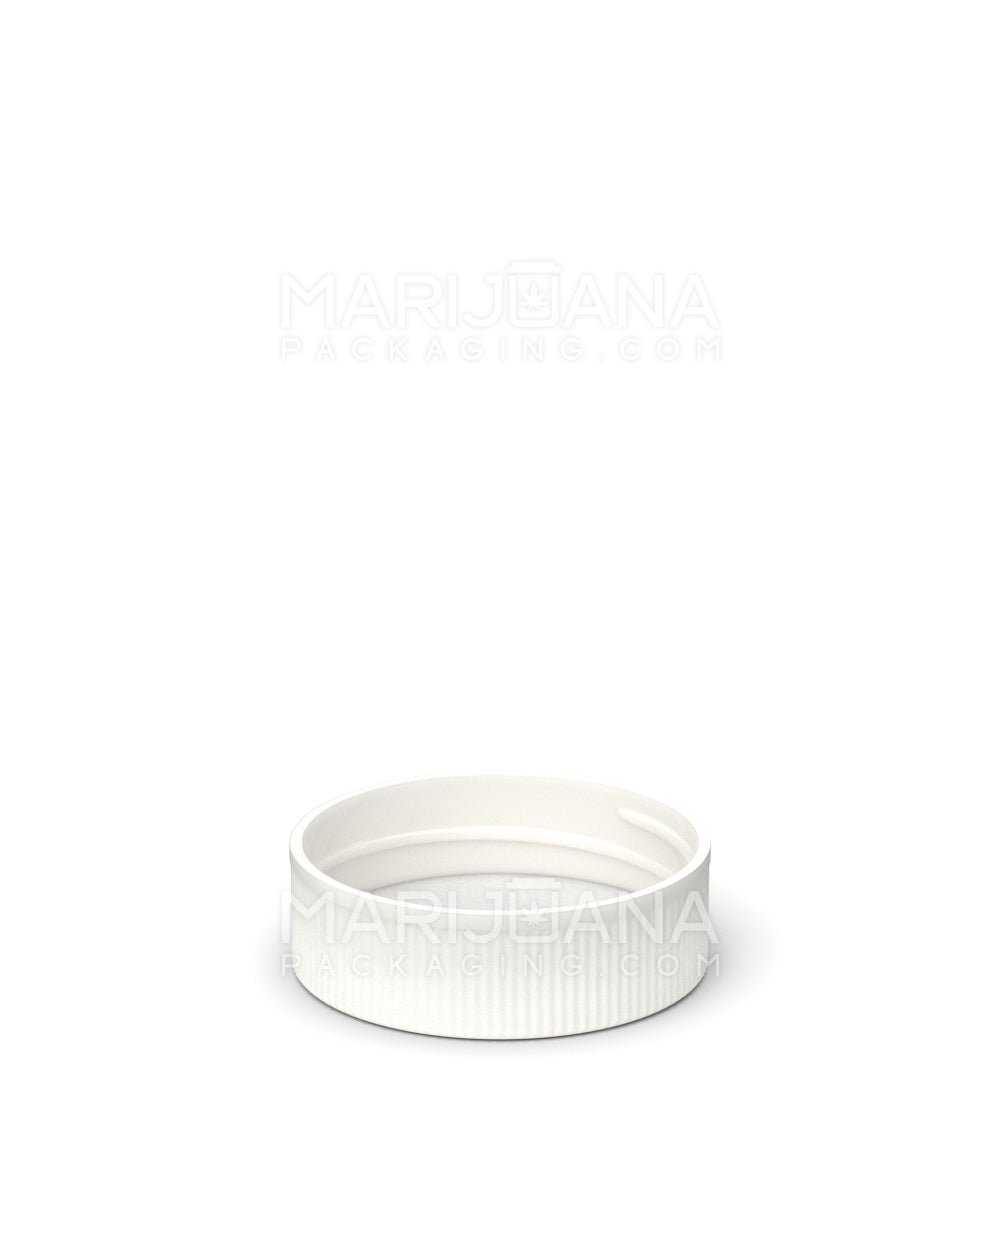 Ribbed Screw Top Flat Plastic Caps w/ Foam Liner | 28mm - Glossy White - 250 Count - 4